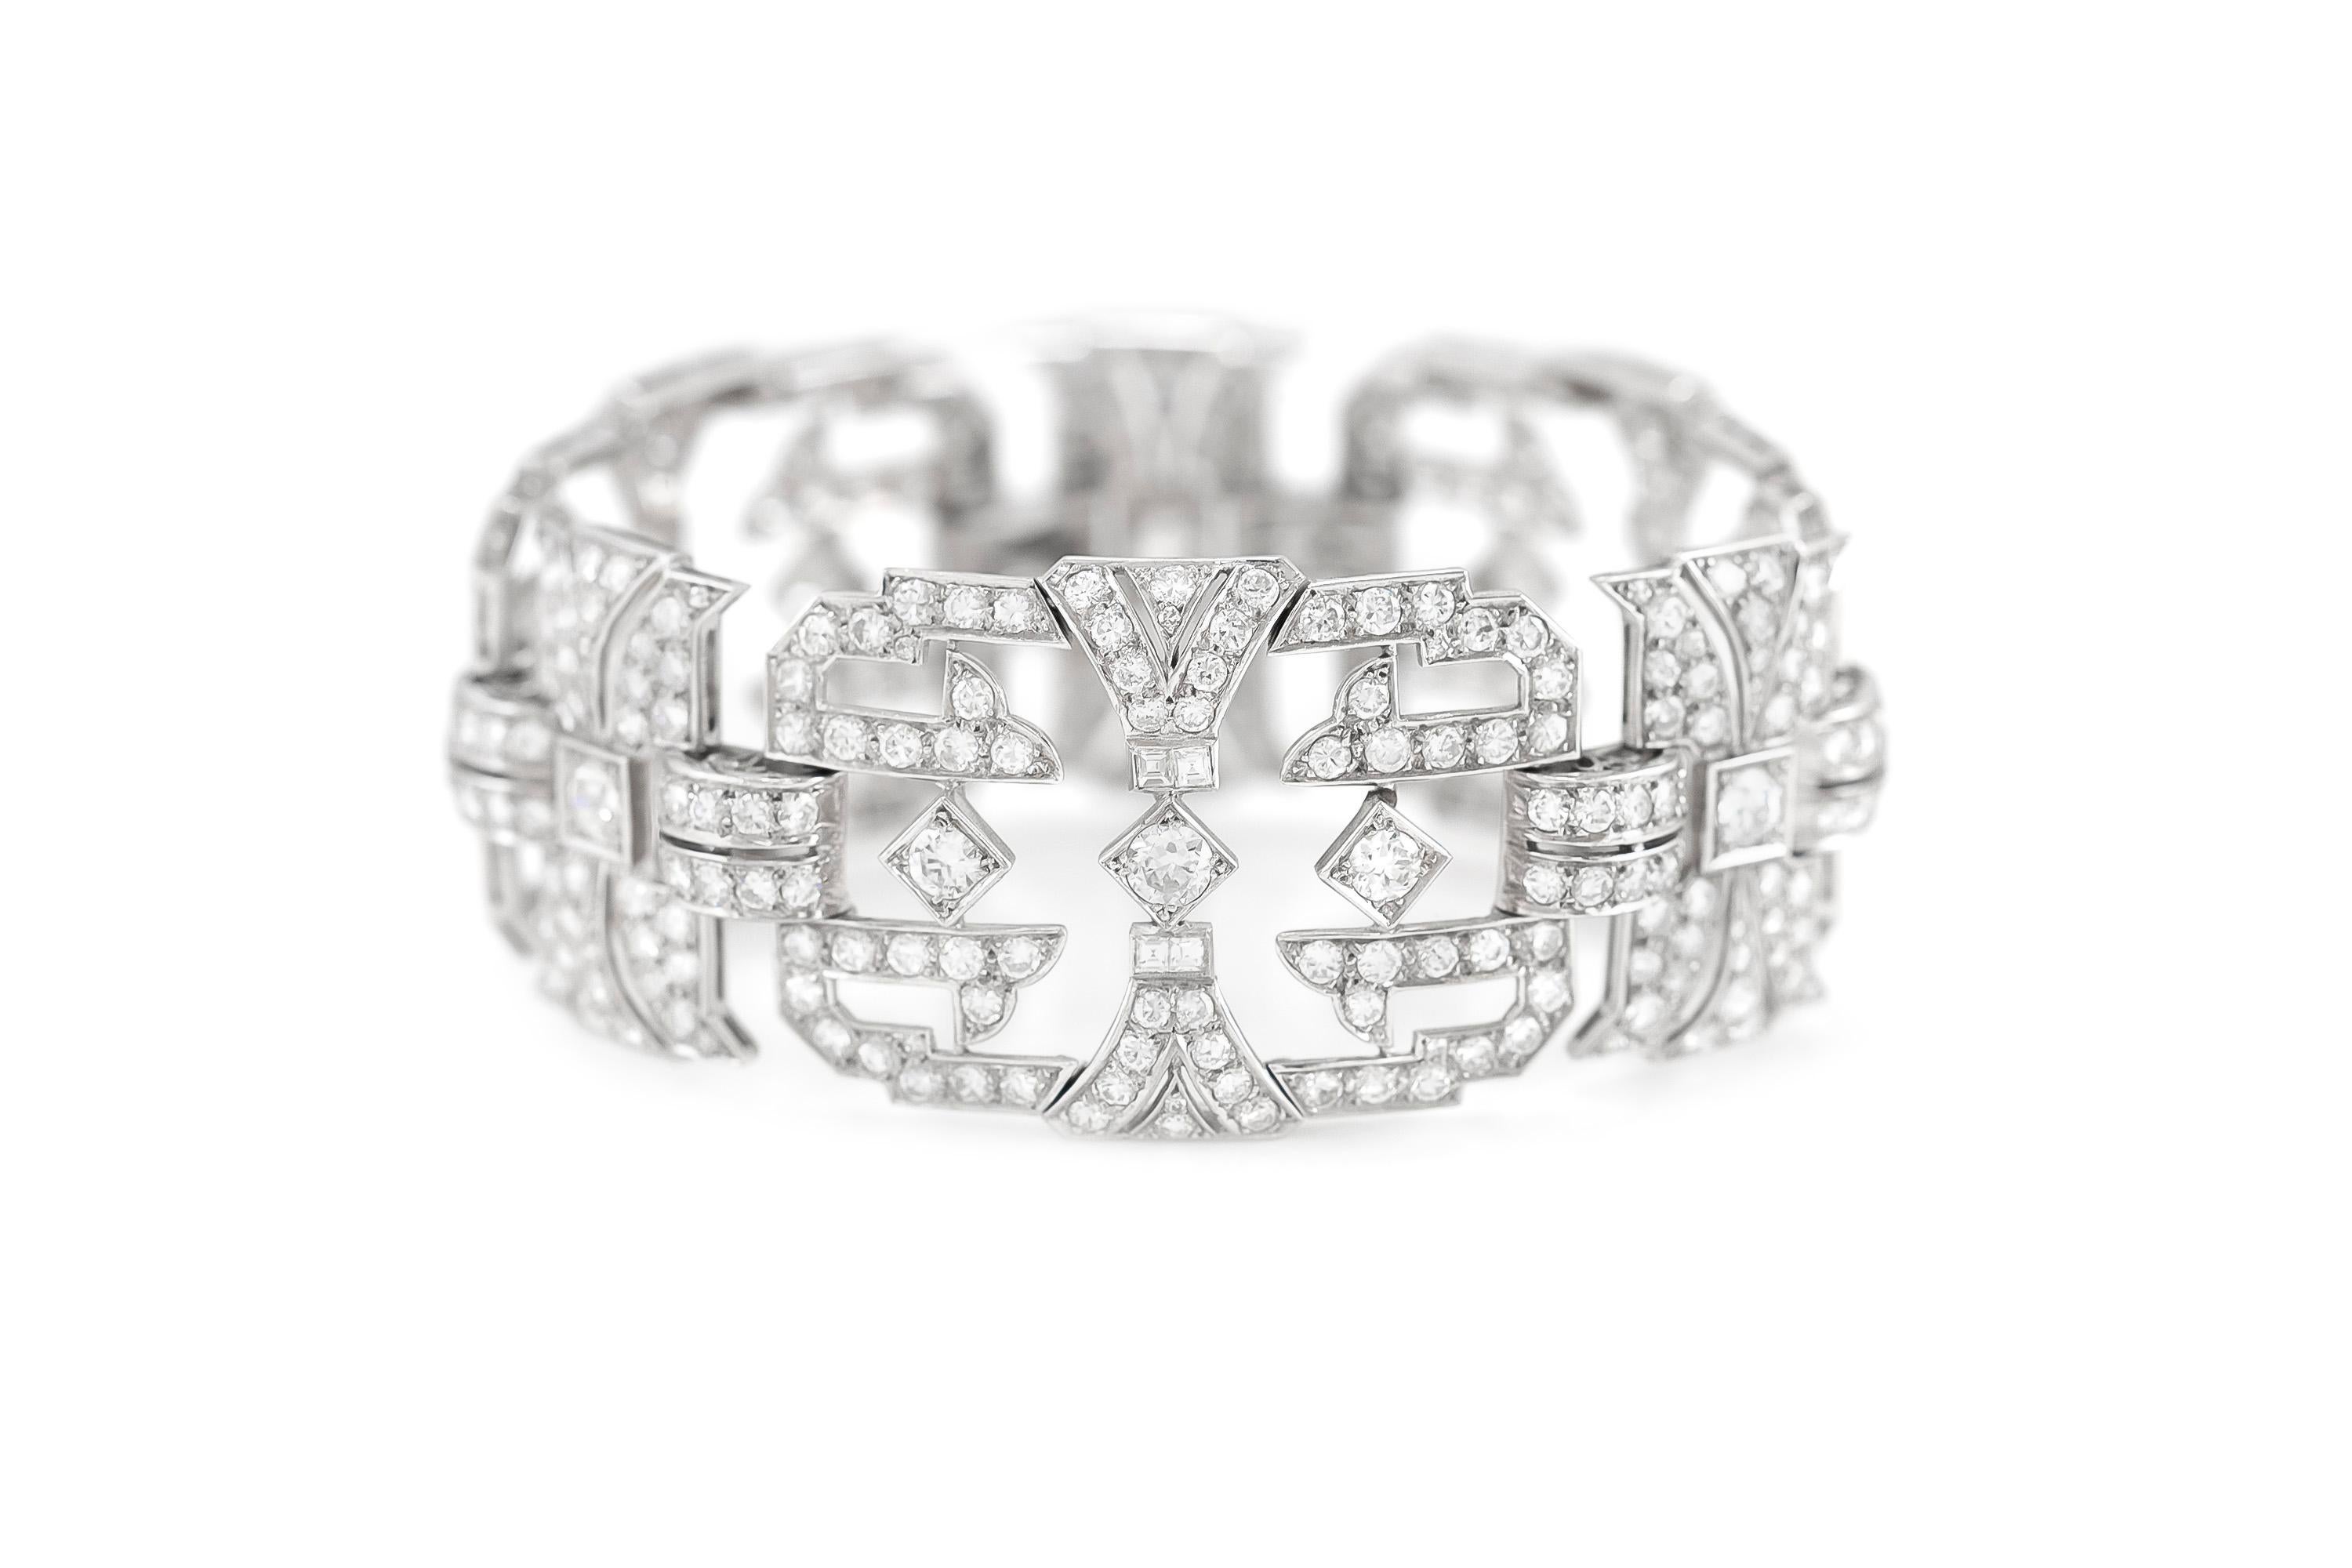 The beautiful bracelet is finely crafted in platinum with beautiful diamonds in diferrent cut weighing approximately total of 32.00 carat.
Circa 1920